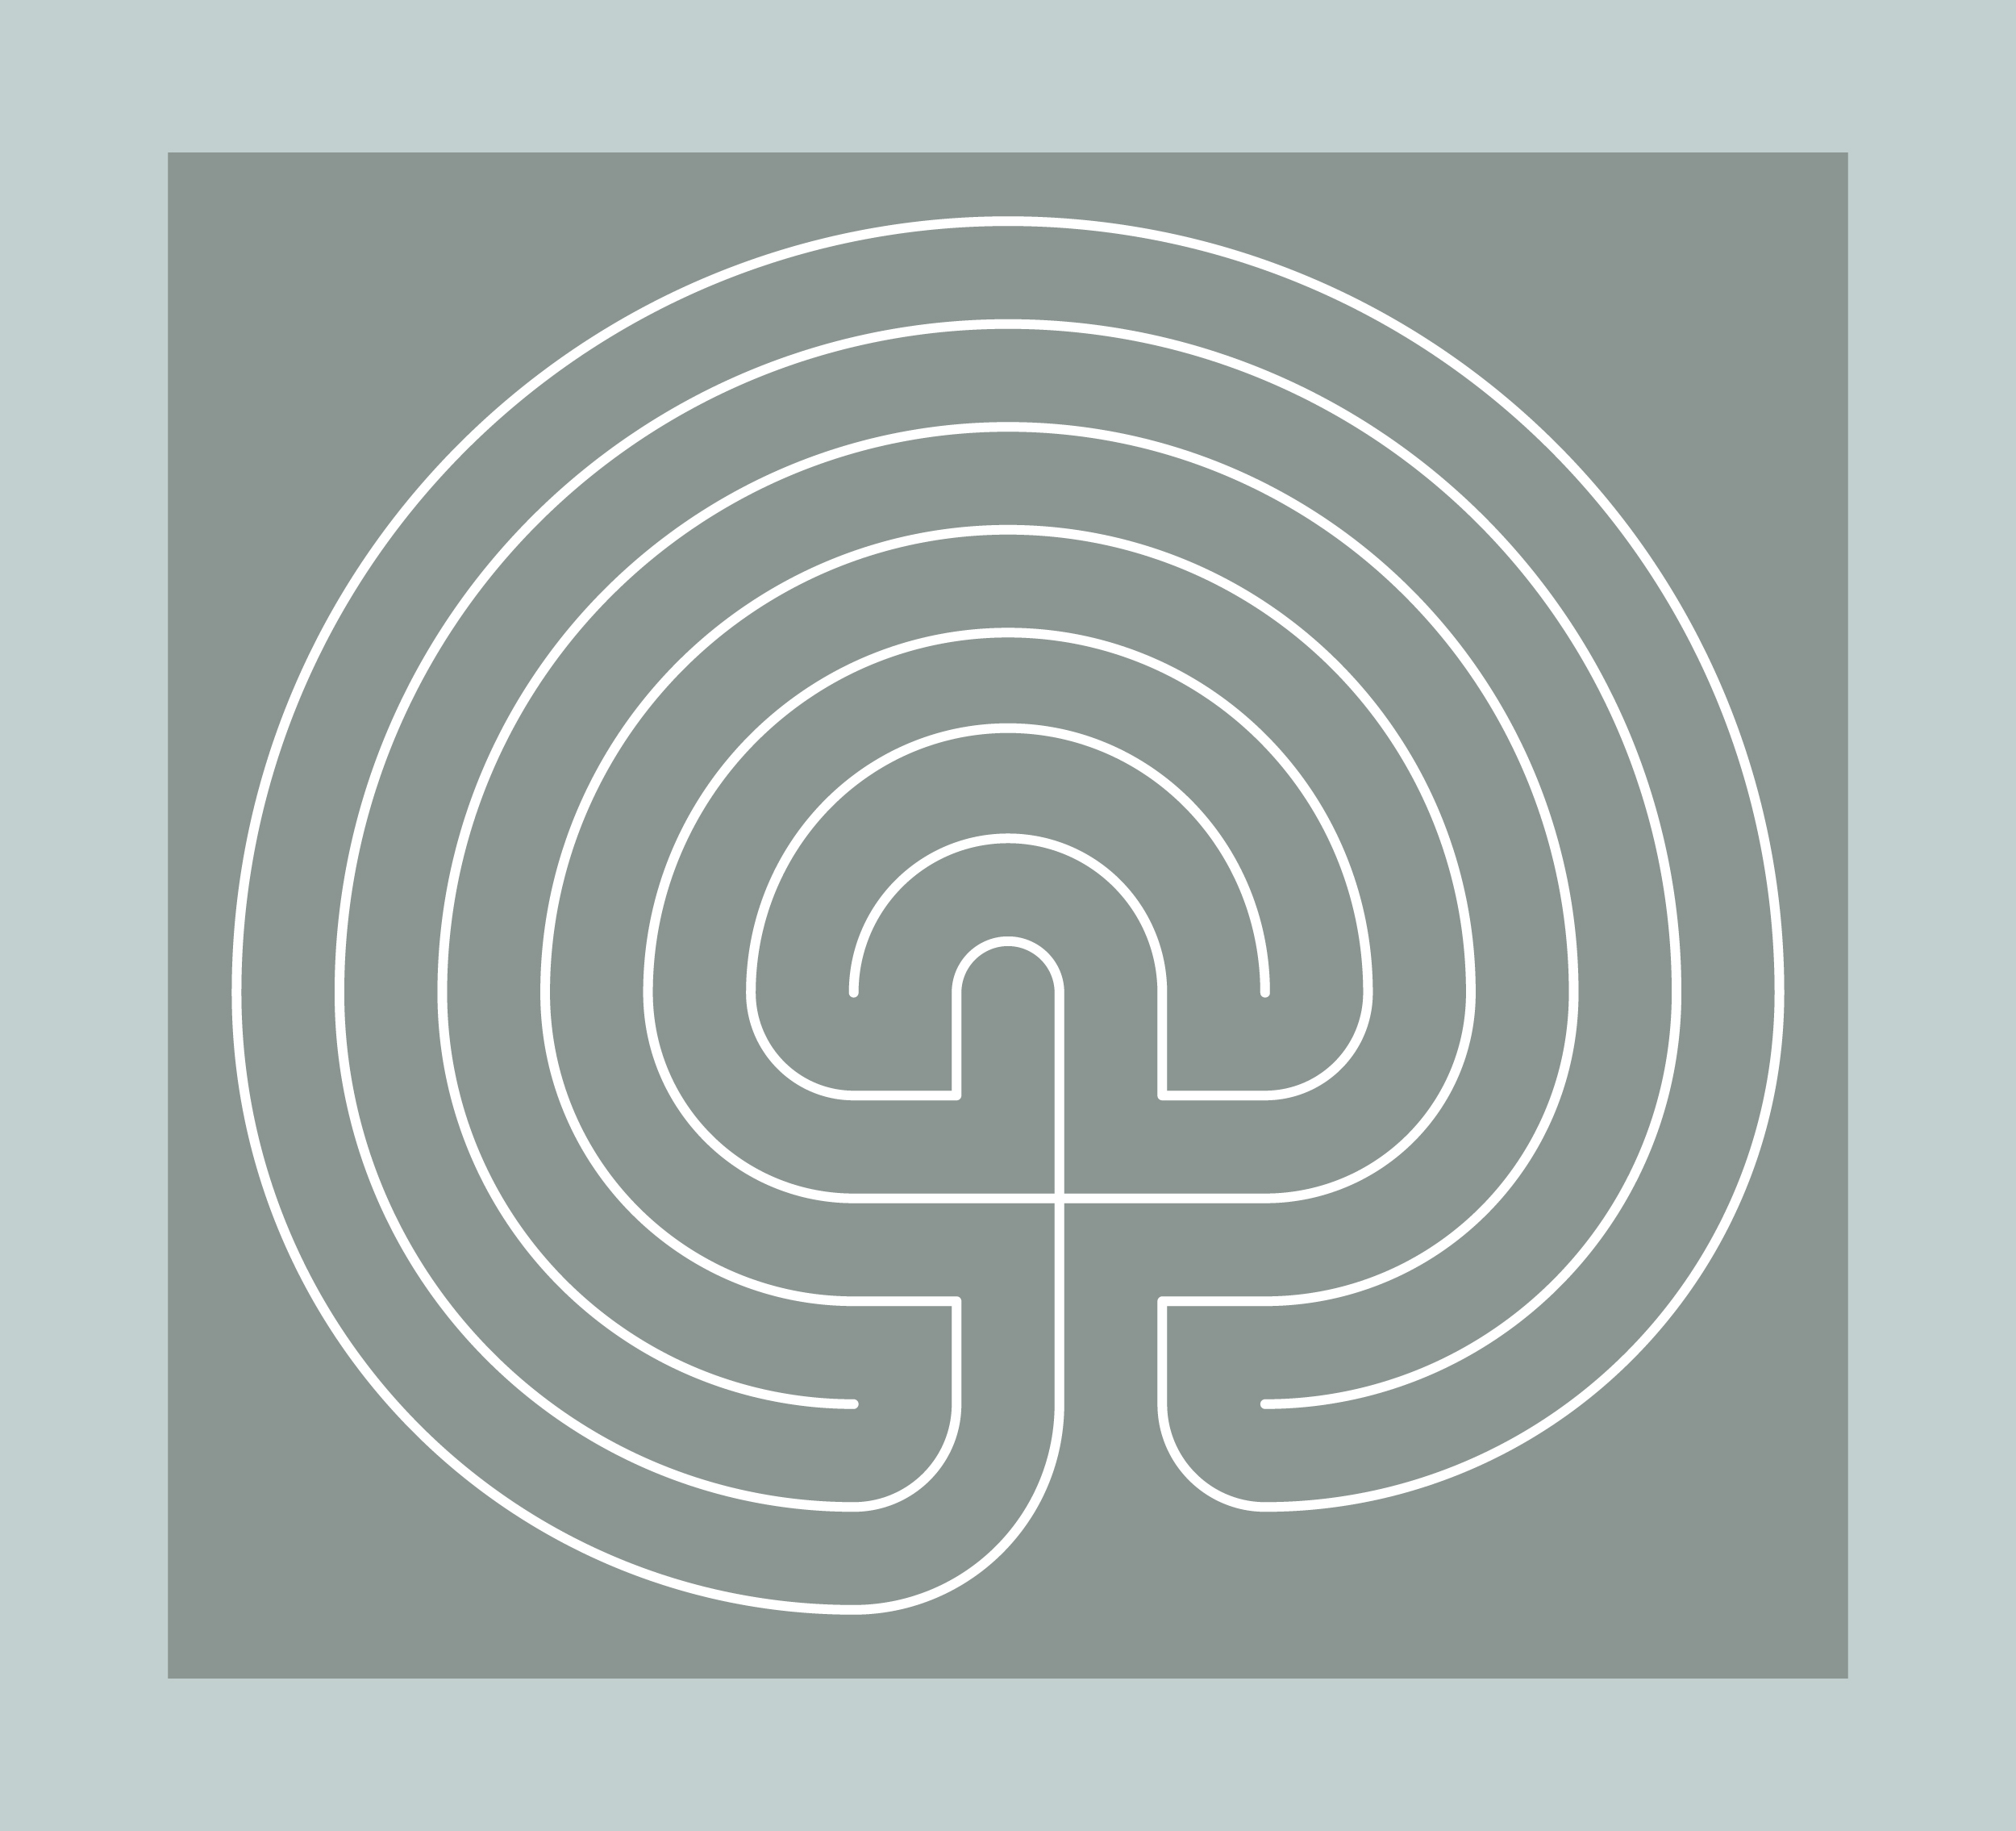 Classical Seven-Circuit Labyrinth by JamesJen